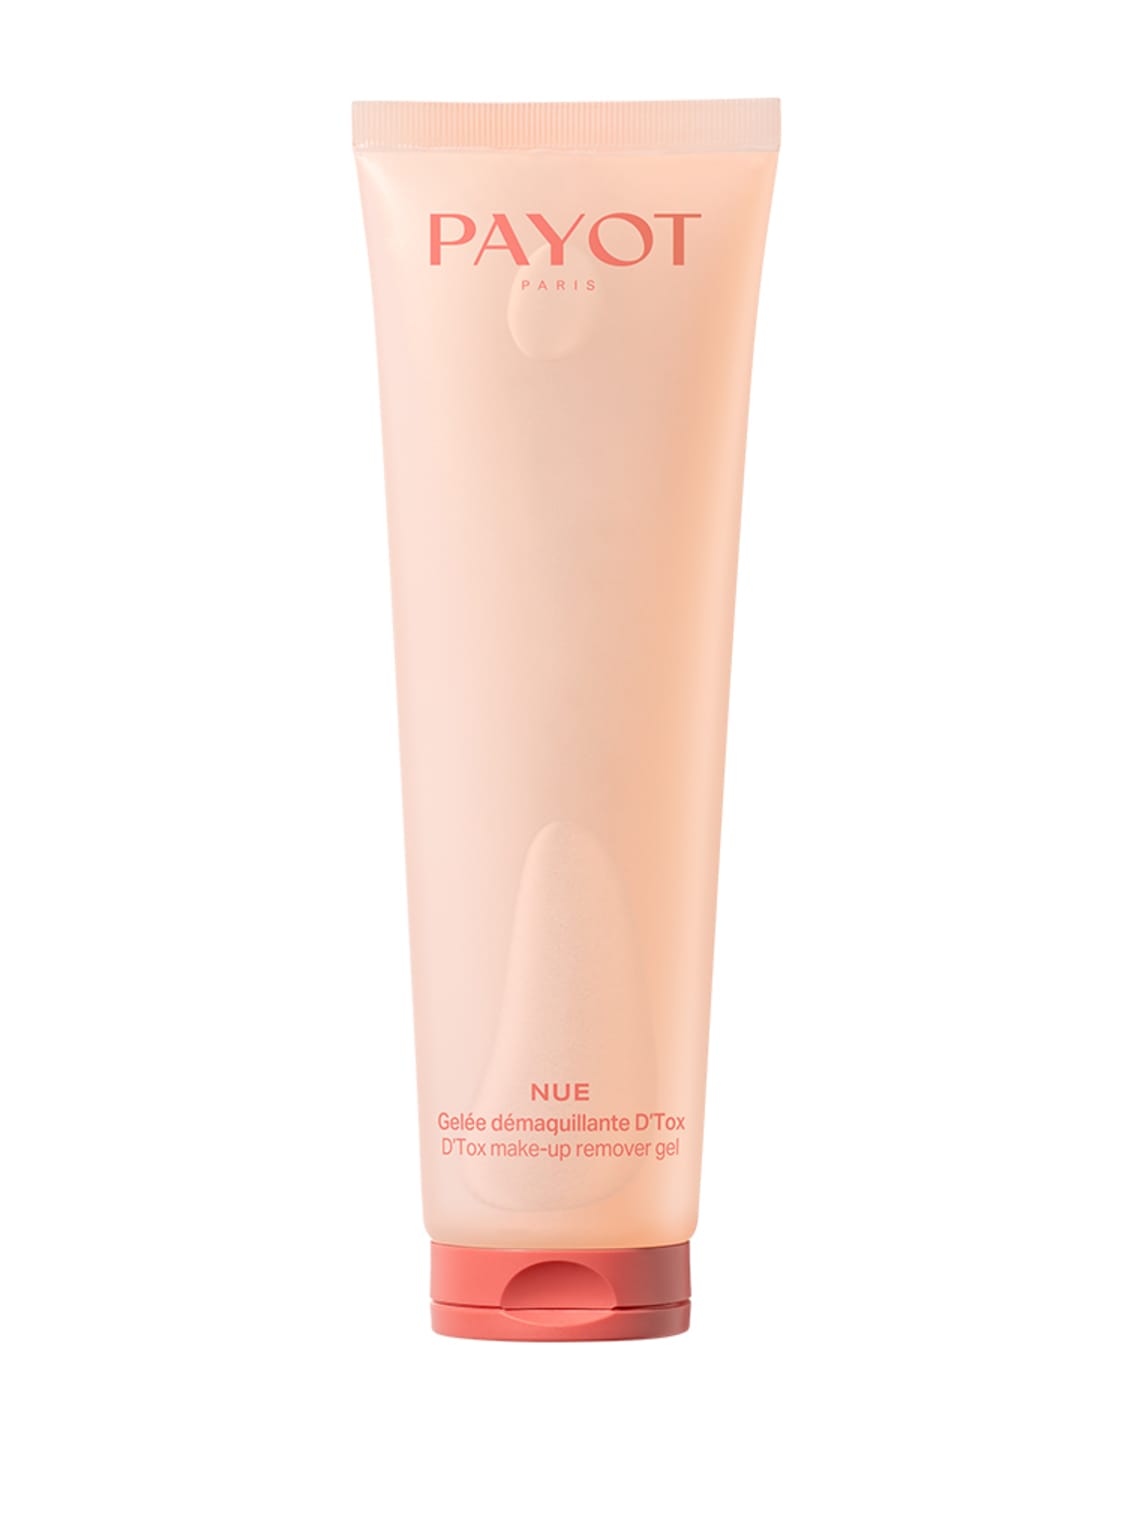 Payot Nue D'Tox Make-up Remover Gel 150 ml von PAYOT